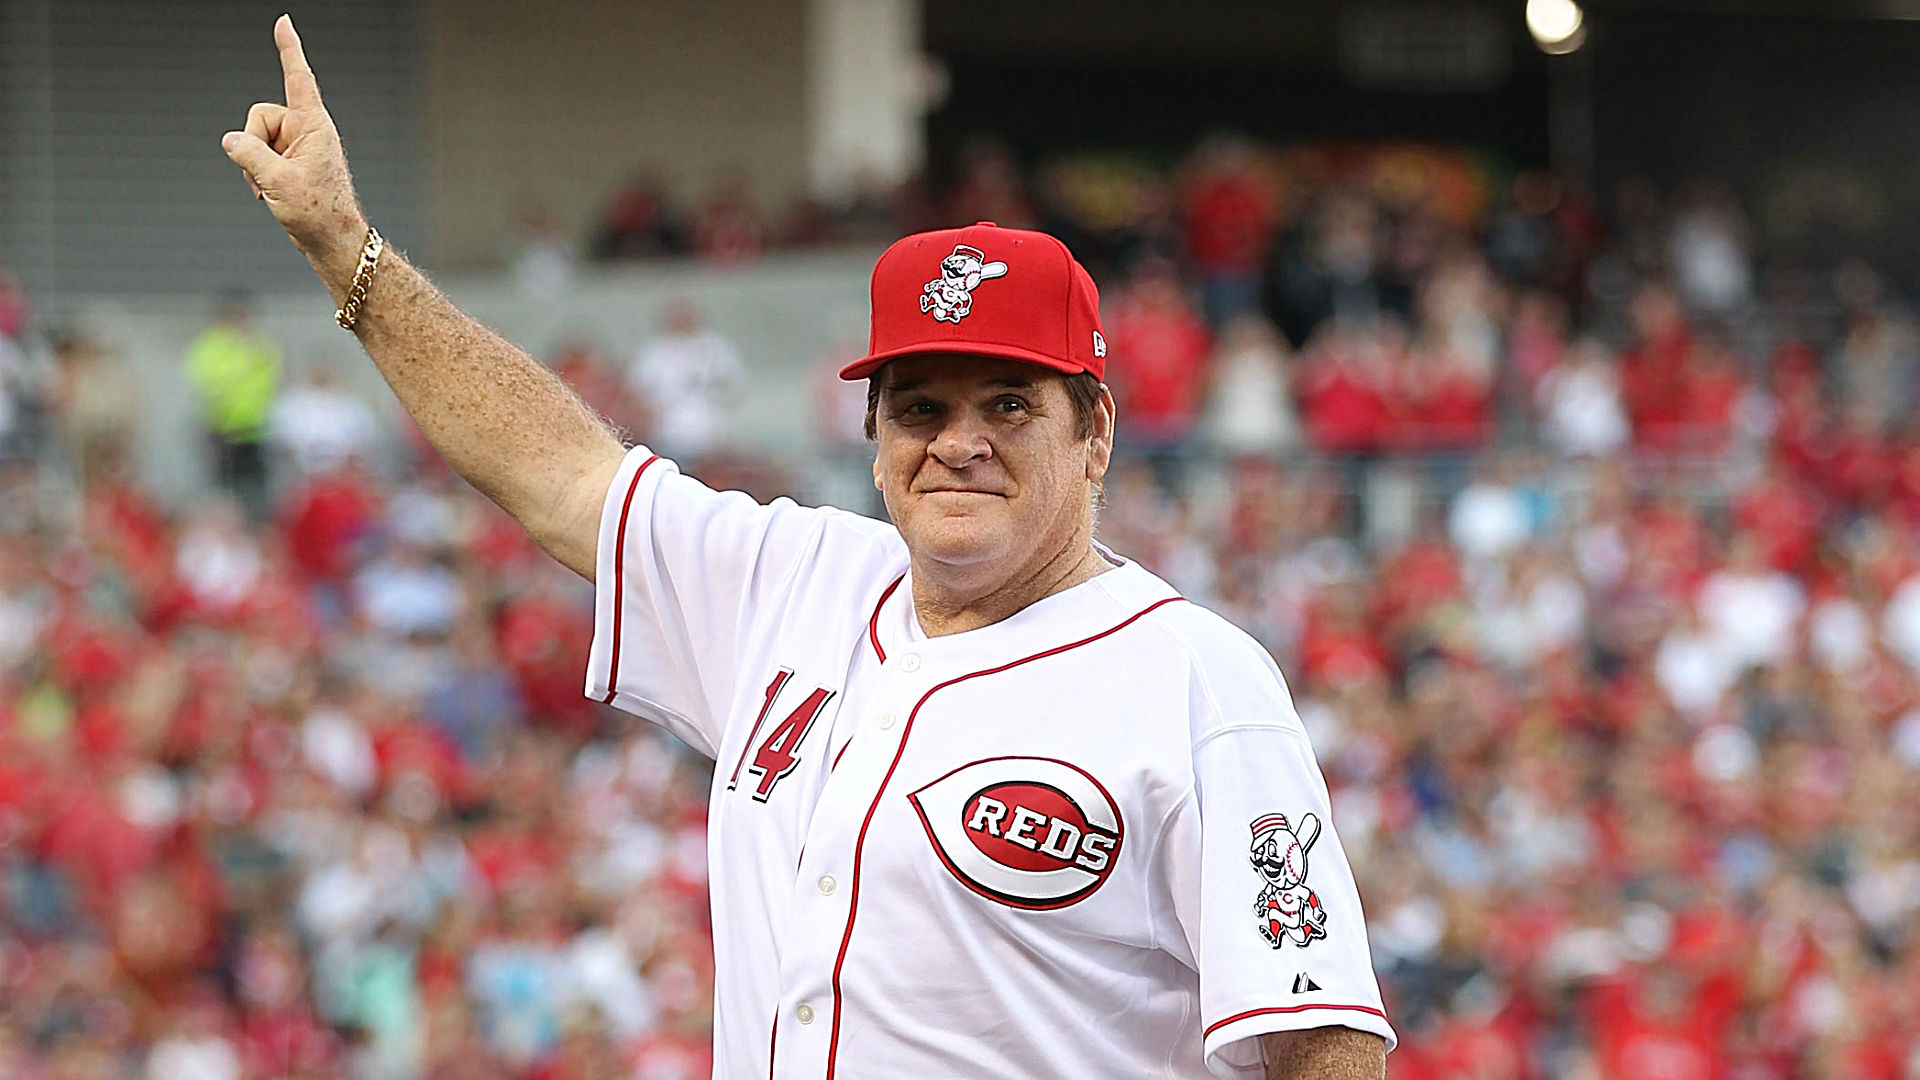 MLB commissioner expects discussion about Pete Rose reinstatement.